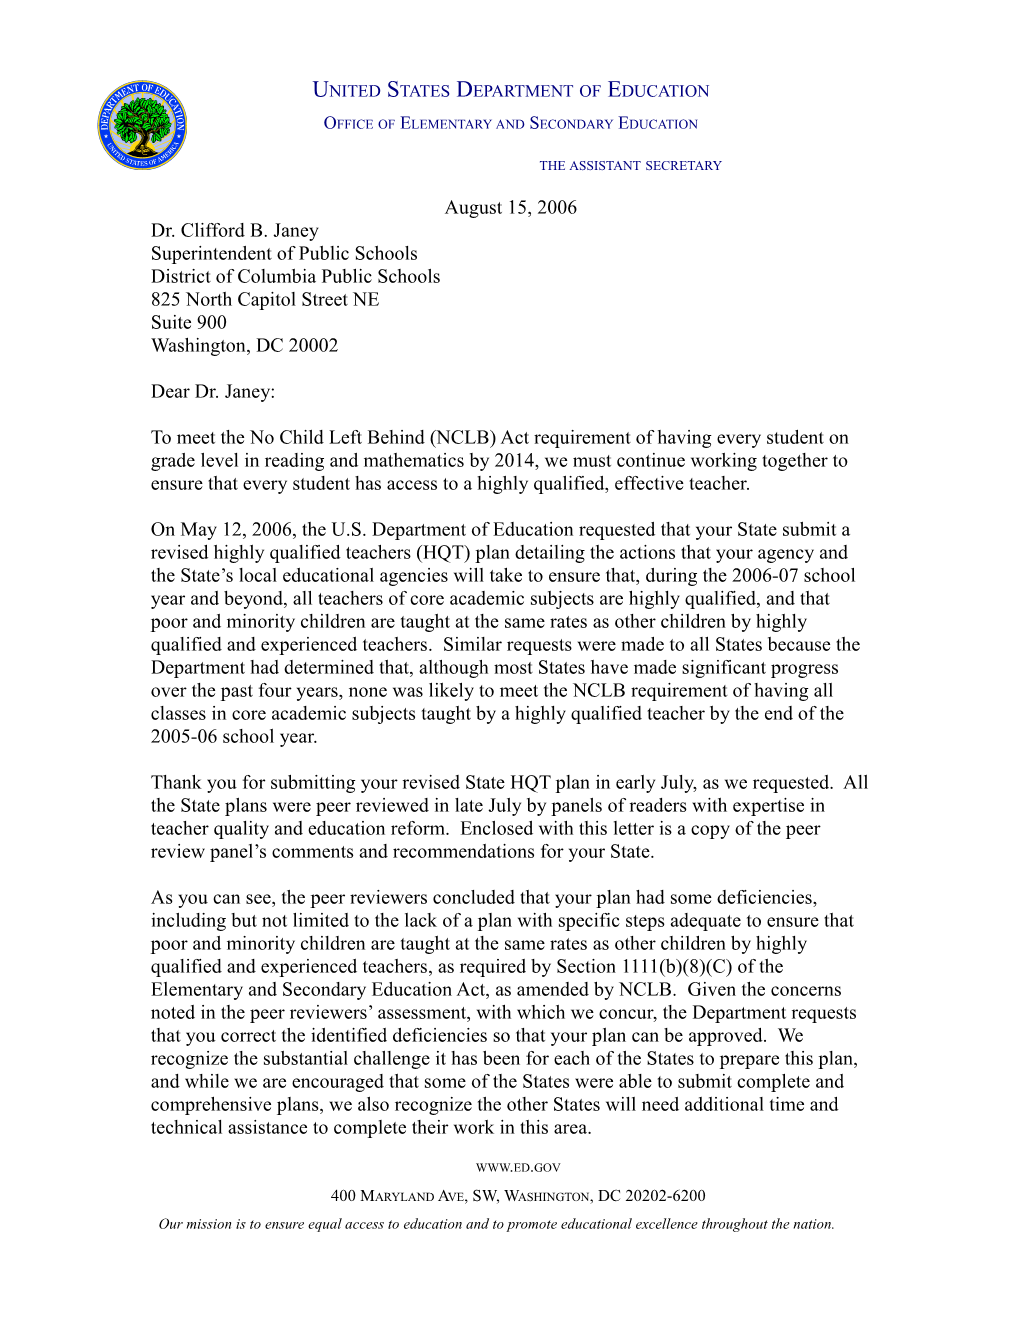 District of Columbia Letter to Chief State School Officer Regarding the Peer Review Comments